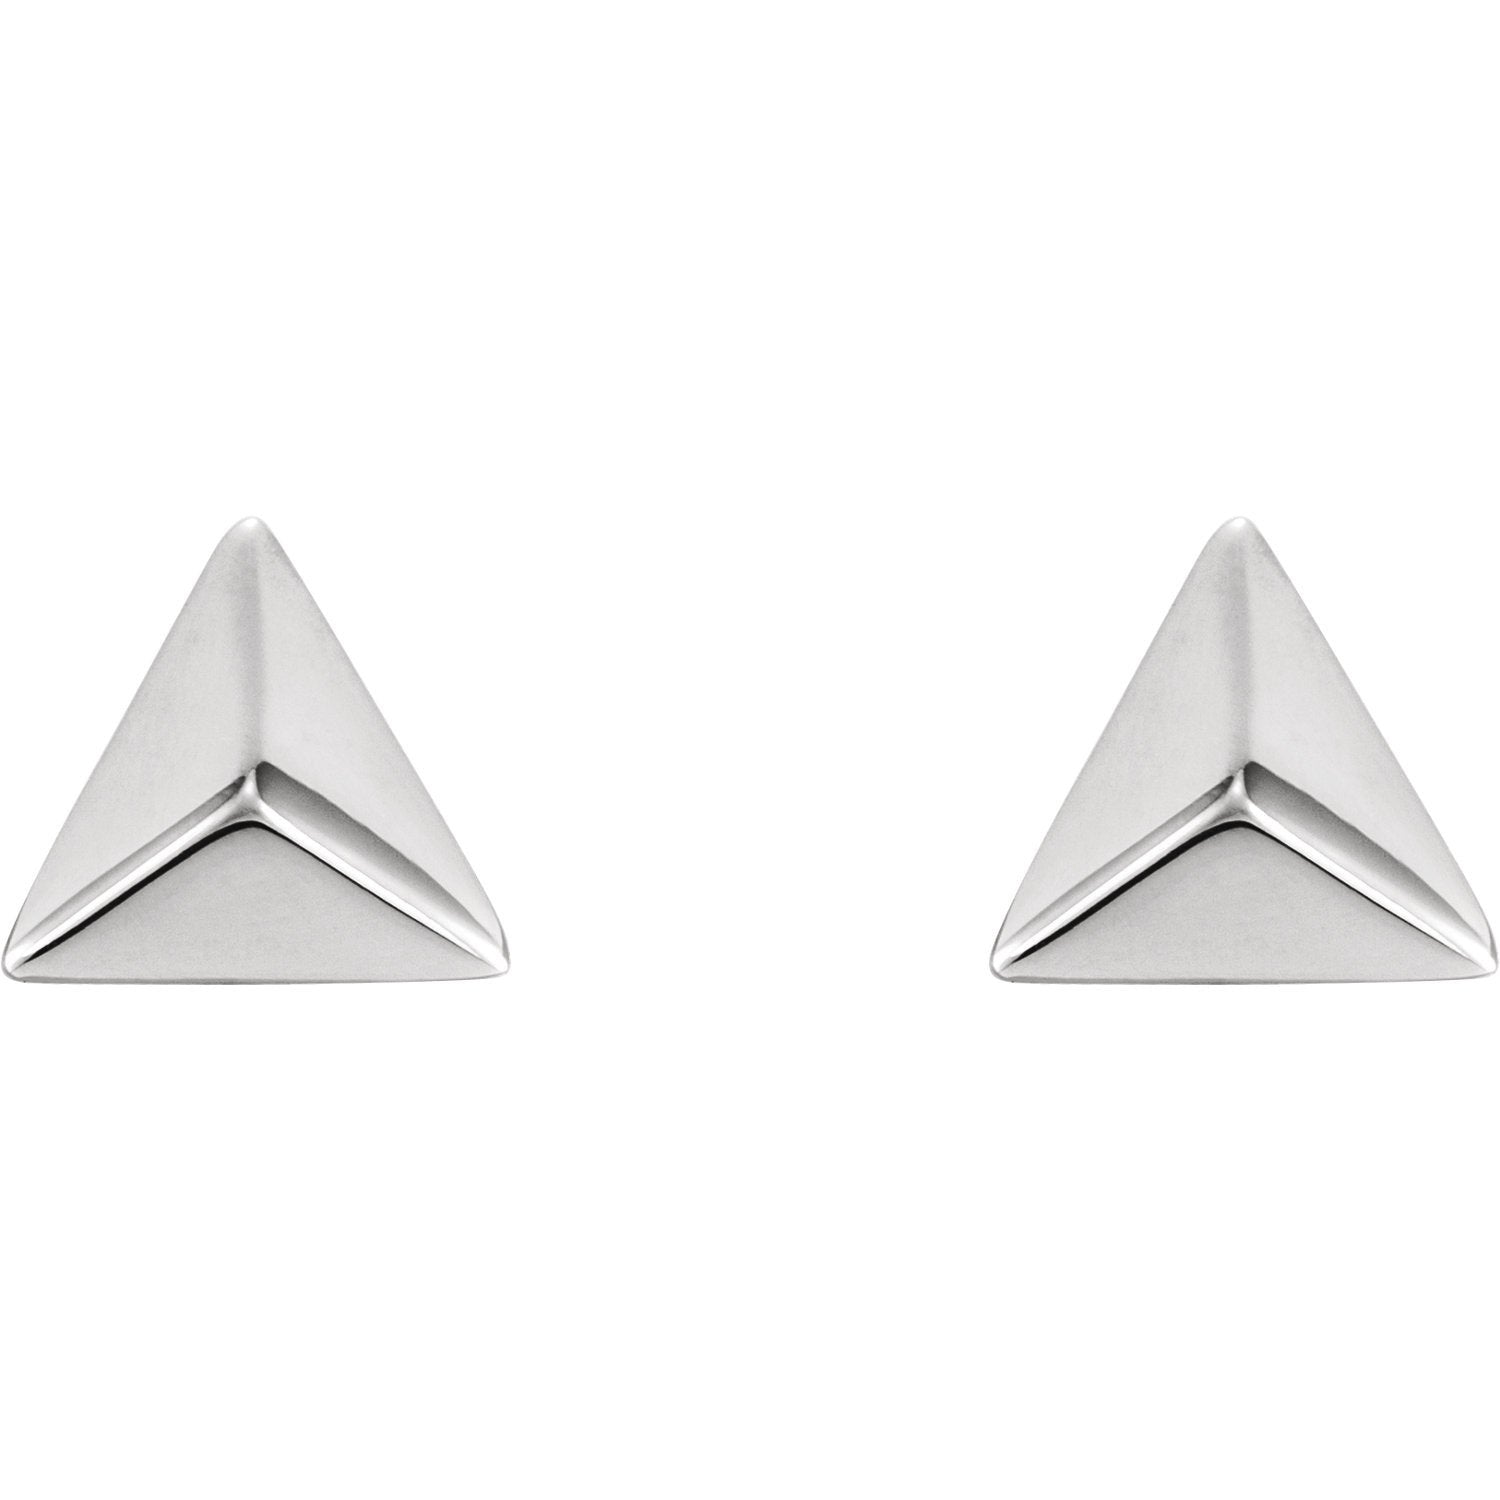 Pyramid Geometric Earrings with Backs - 14K Gold (Y, W or R), Platinum, or Sterling Silver